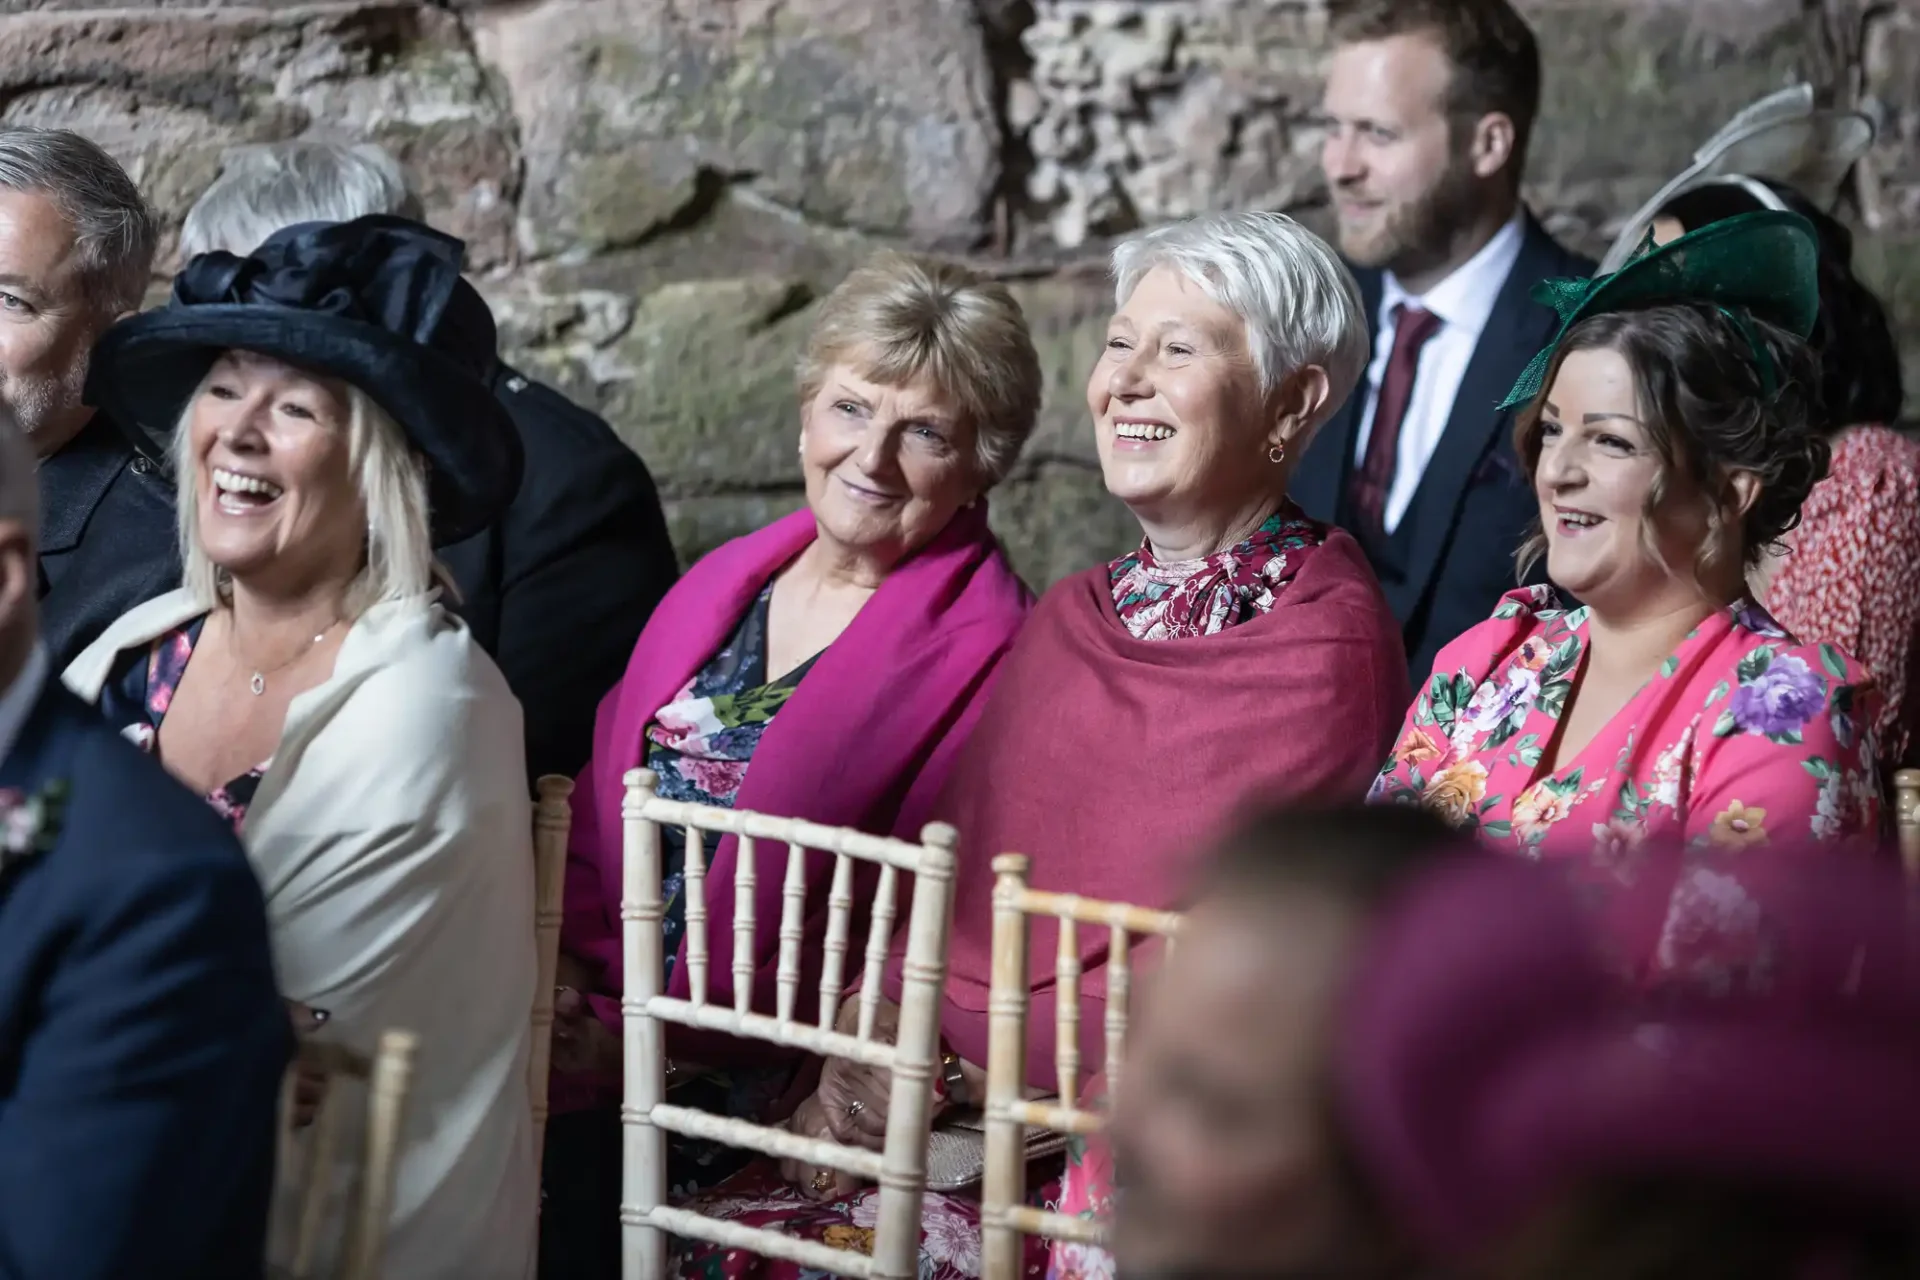 Group of elegantly dressed guests smiling and chatting at a wedding ceremony, held in a rustic stone venue.